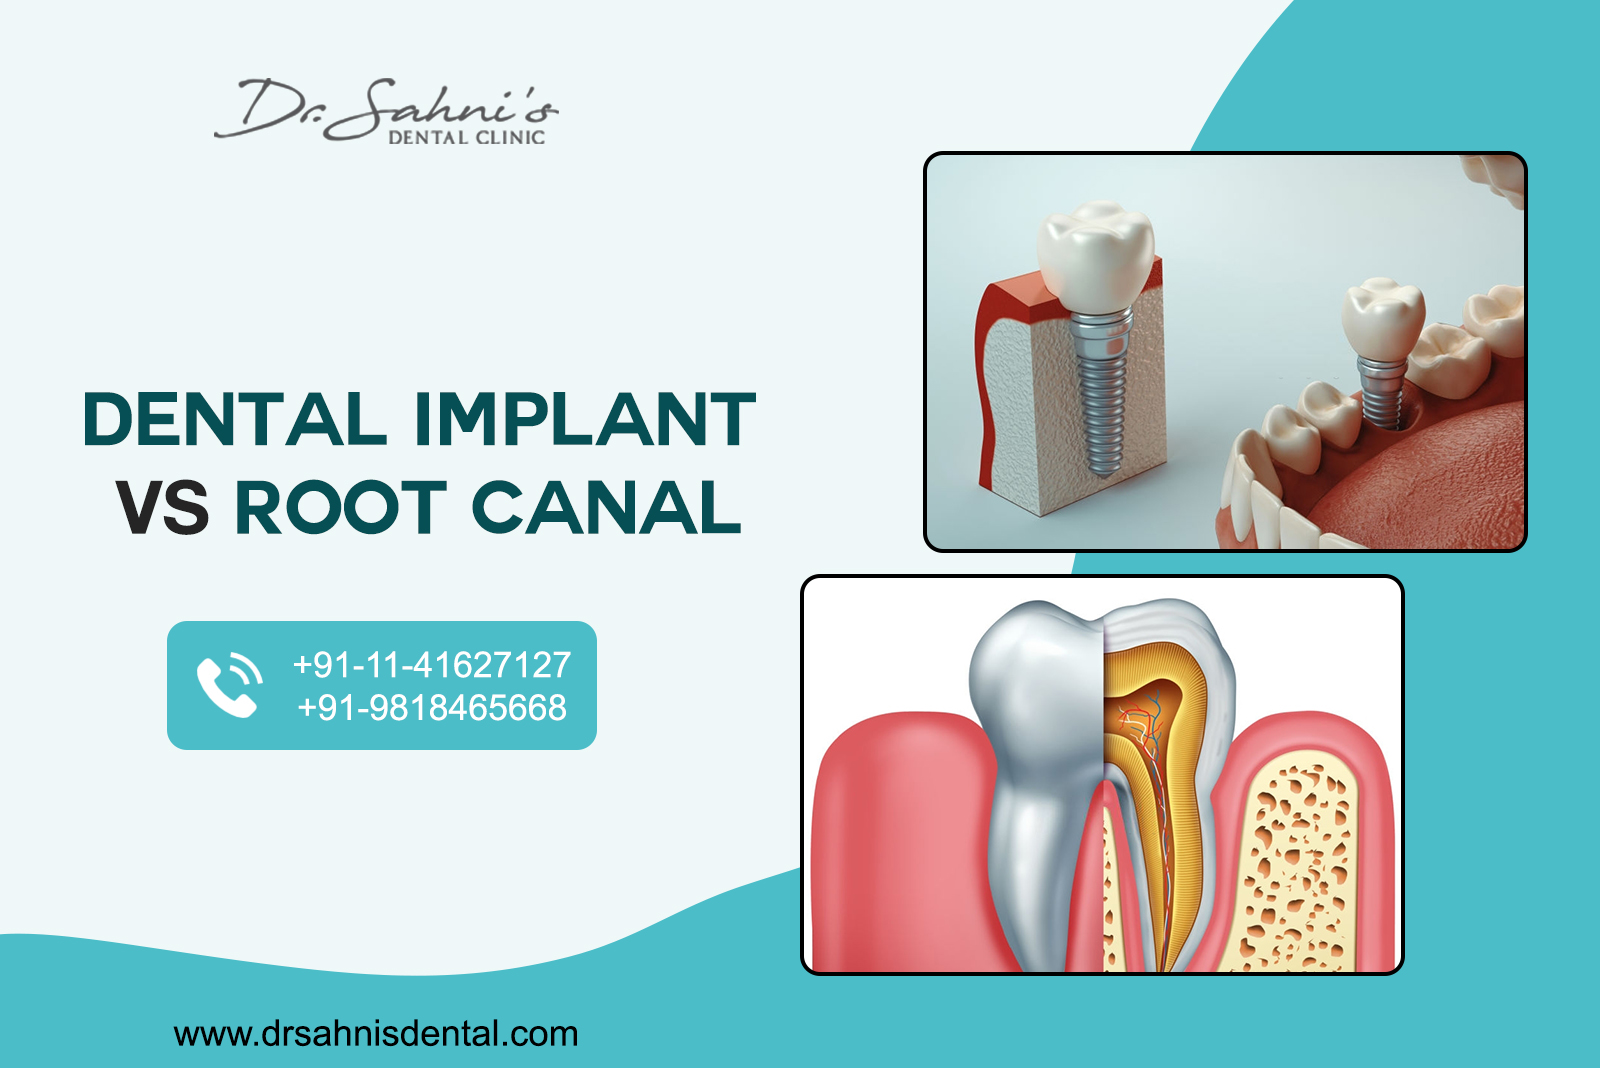 Dental Implant or Root Canal: Which Is Better? Dr. Sahni's Dental Clinic